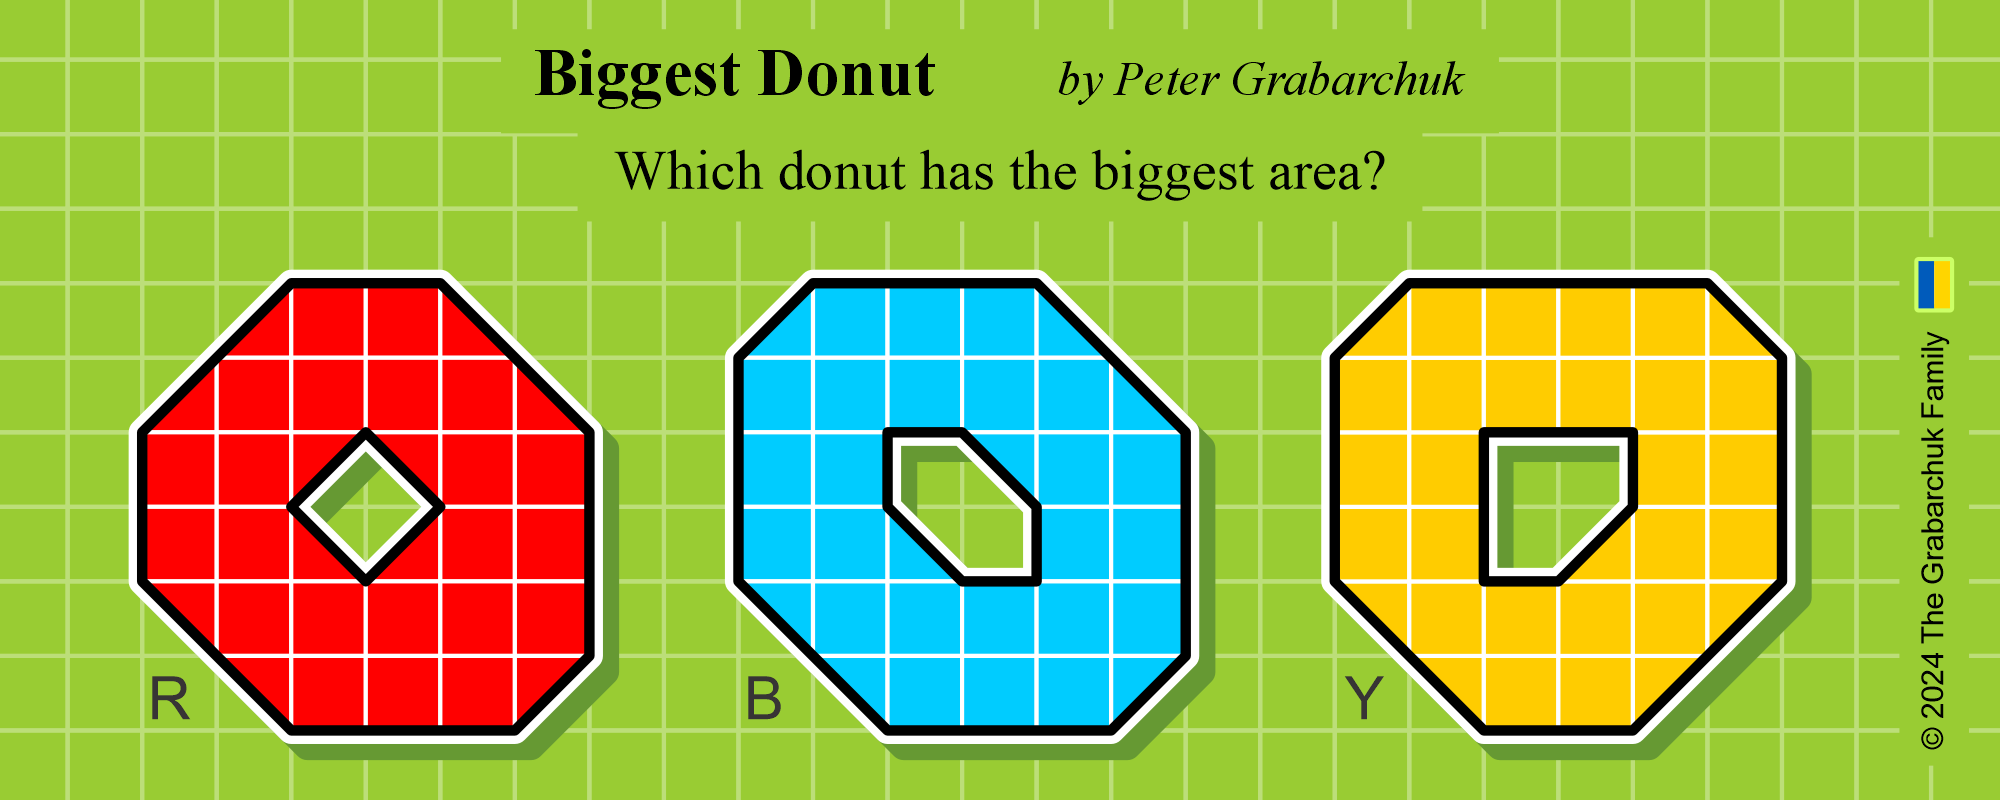 Biggest Donut by Peter Grabarchuk